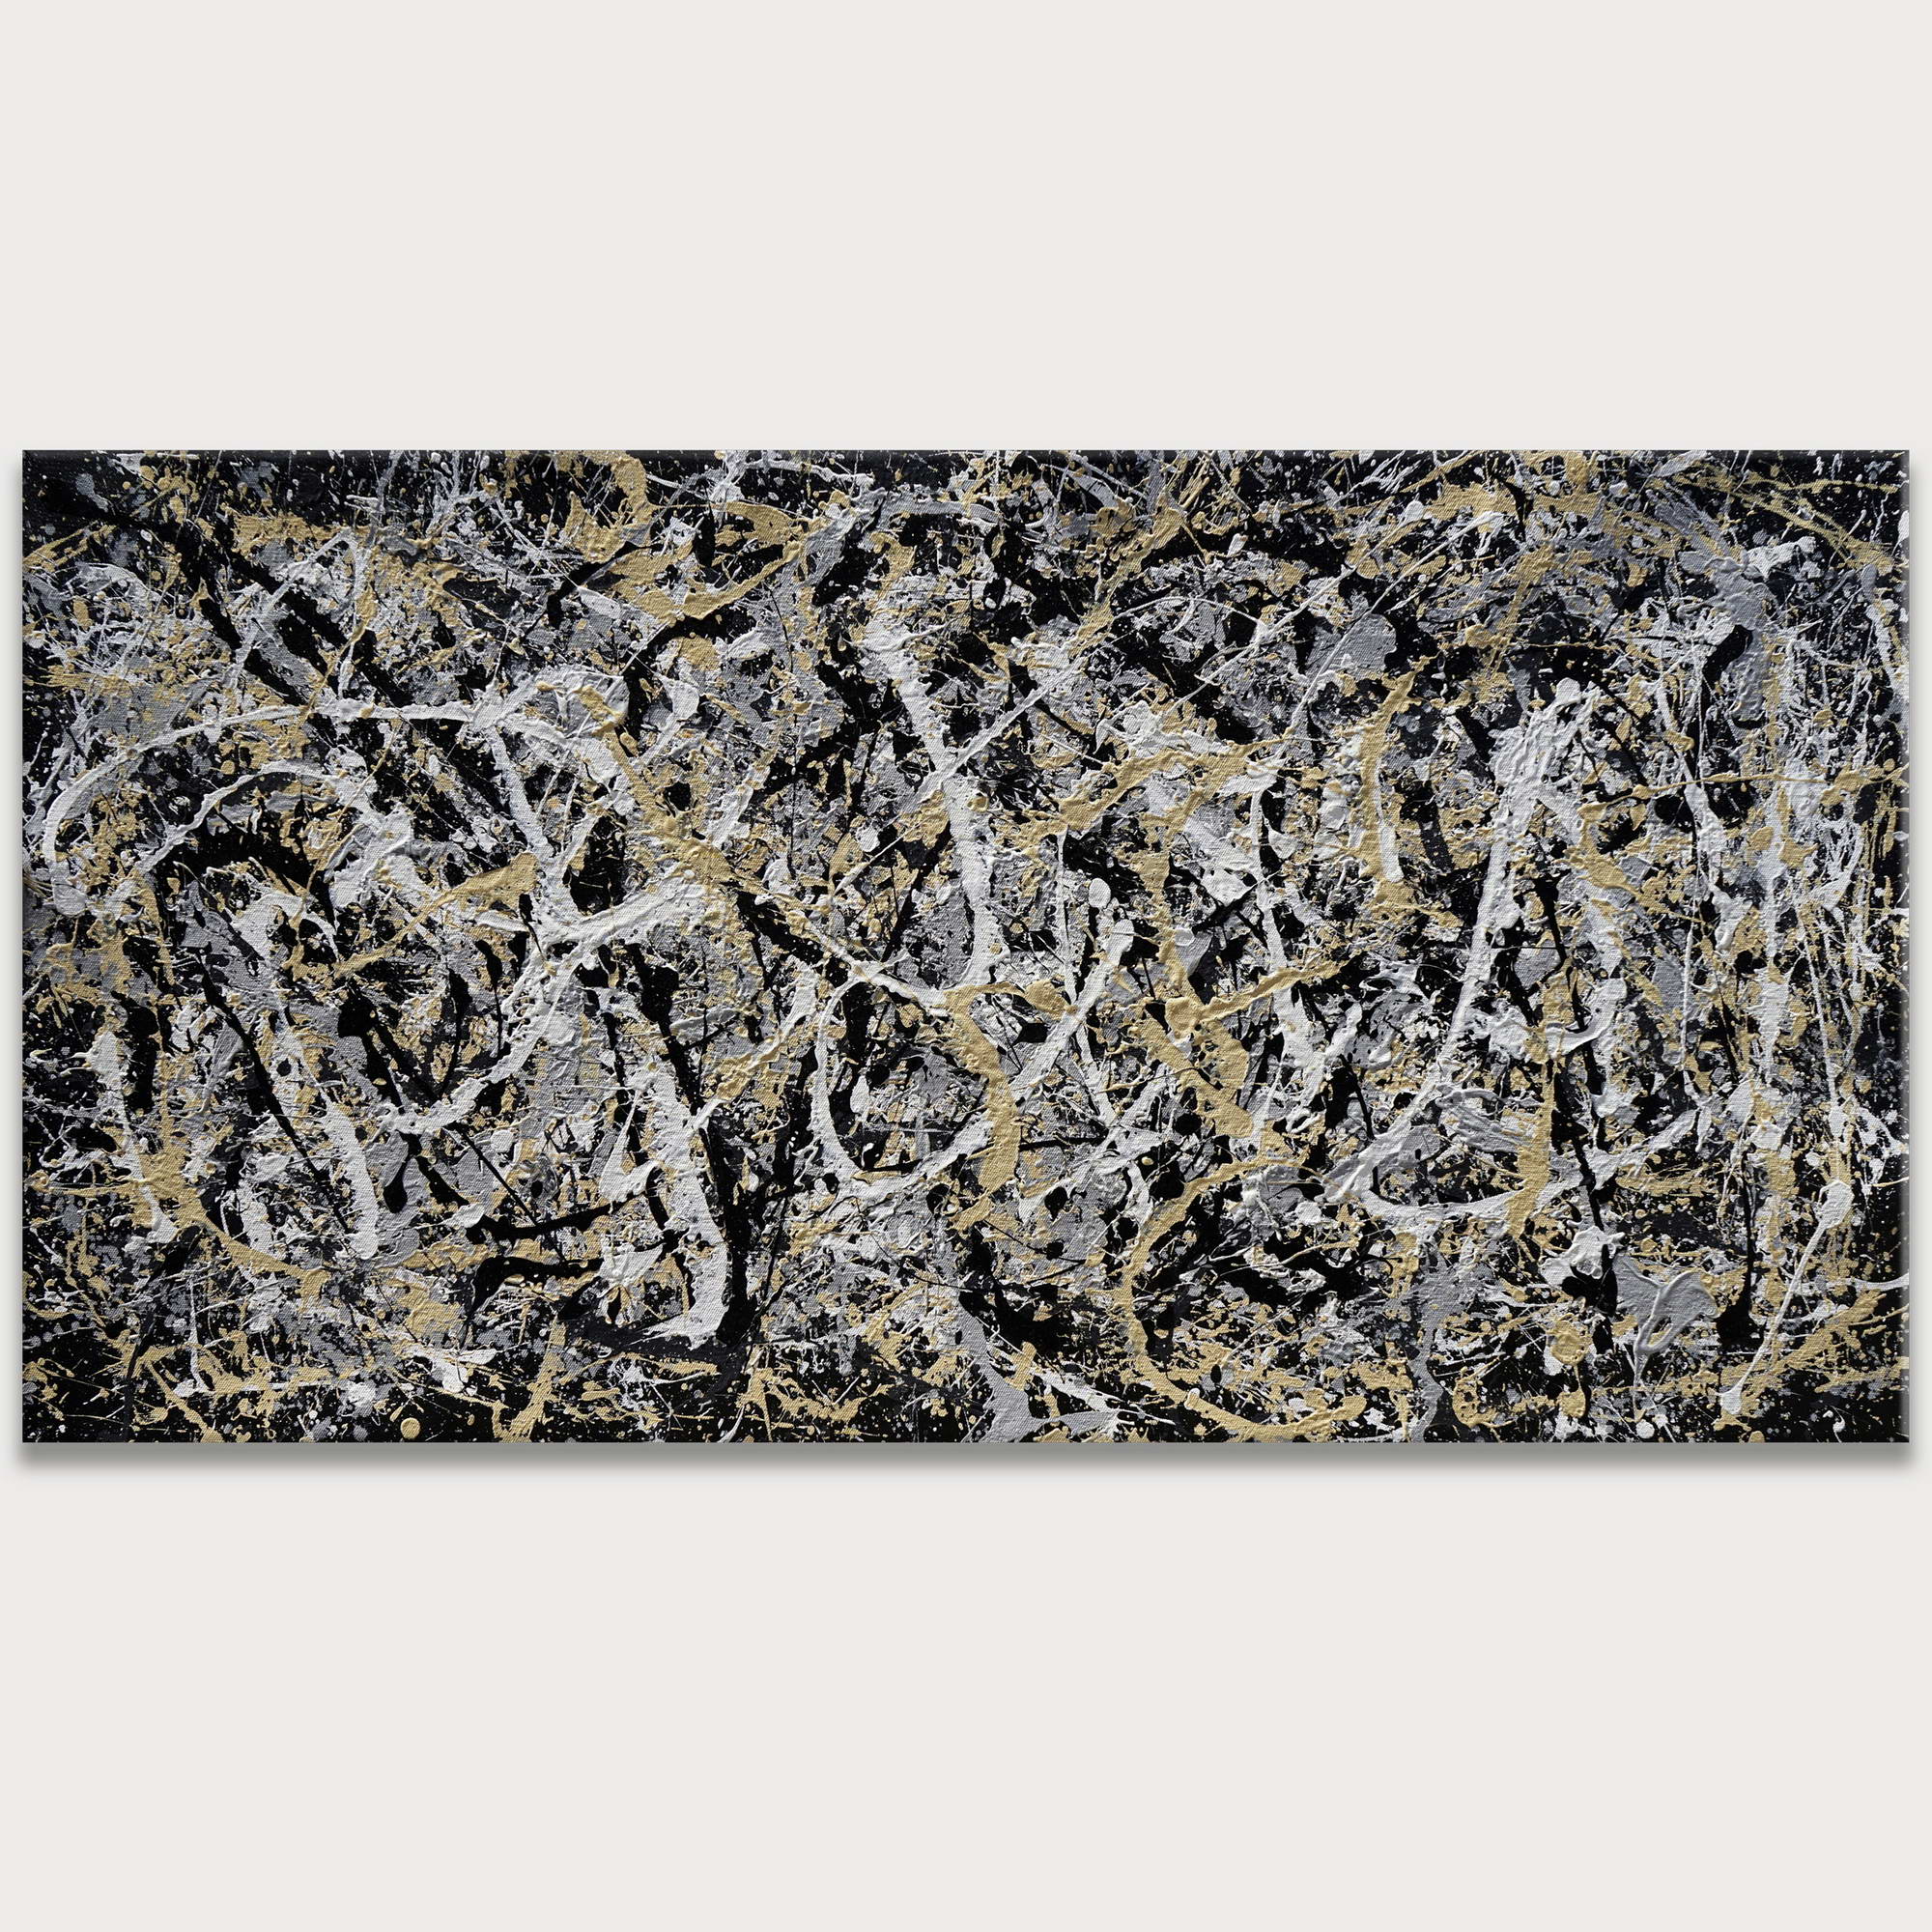 Hand painted Abstract Dynamism Pollock style 75x150cm